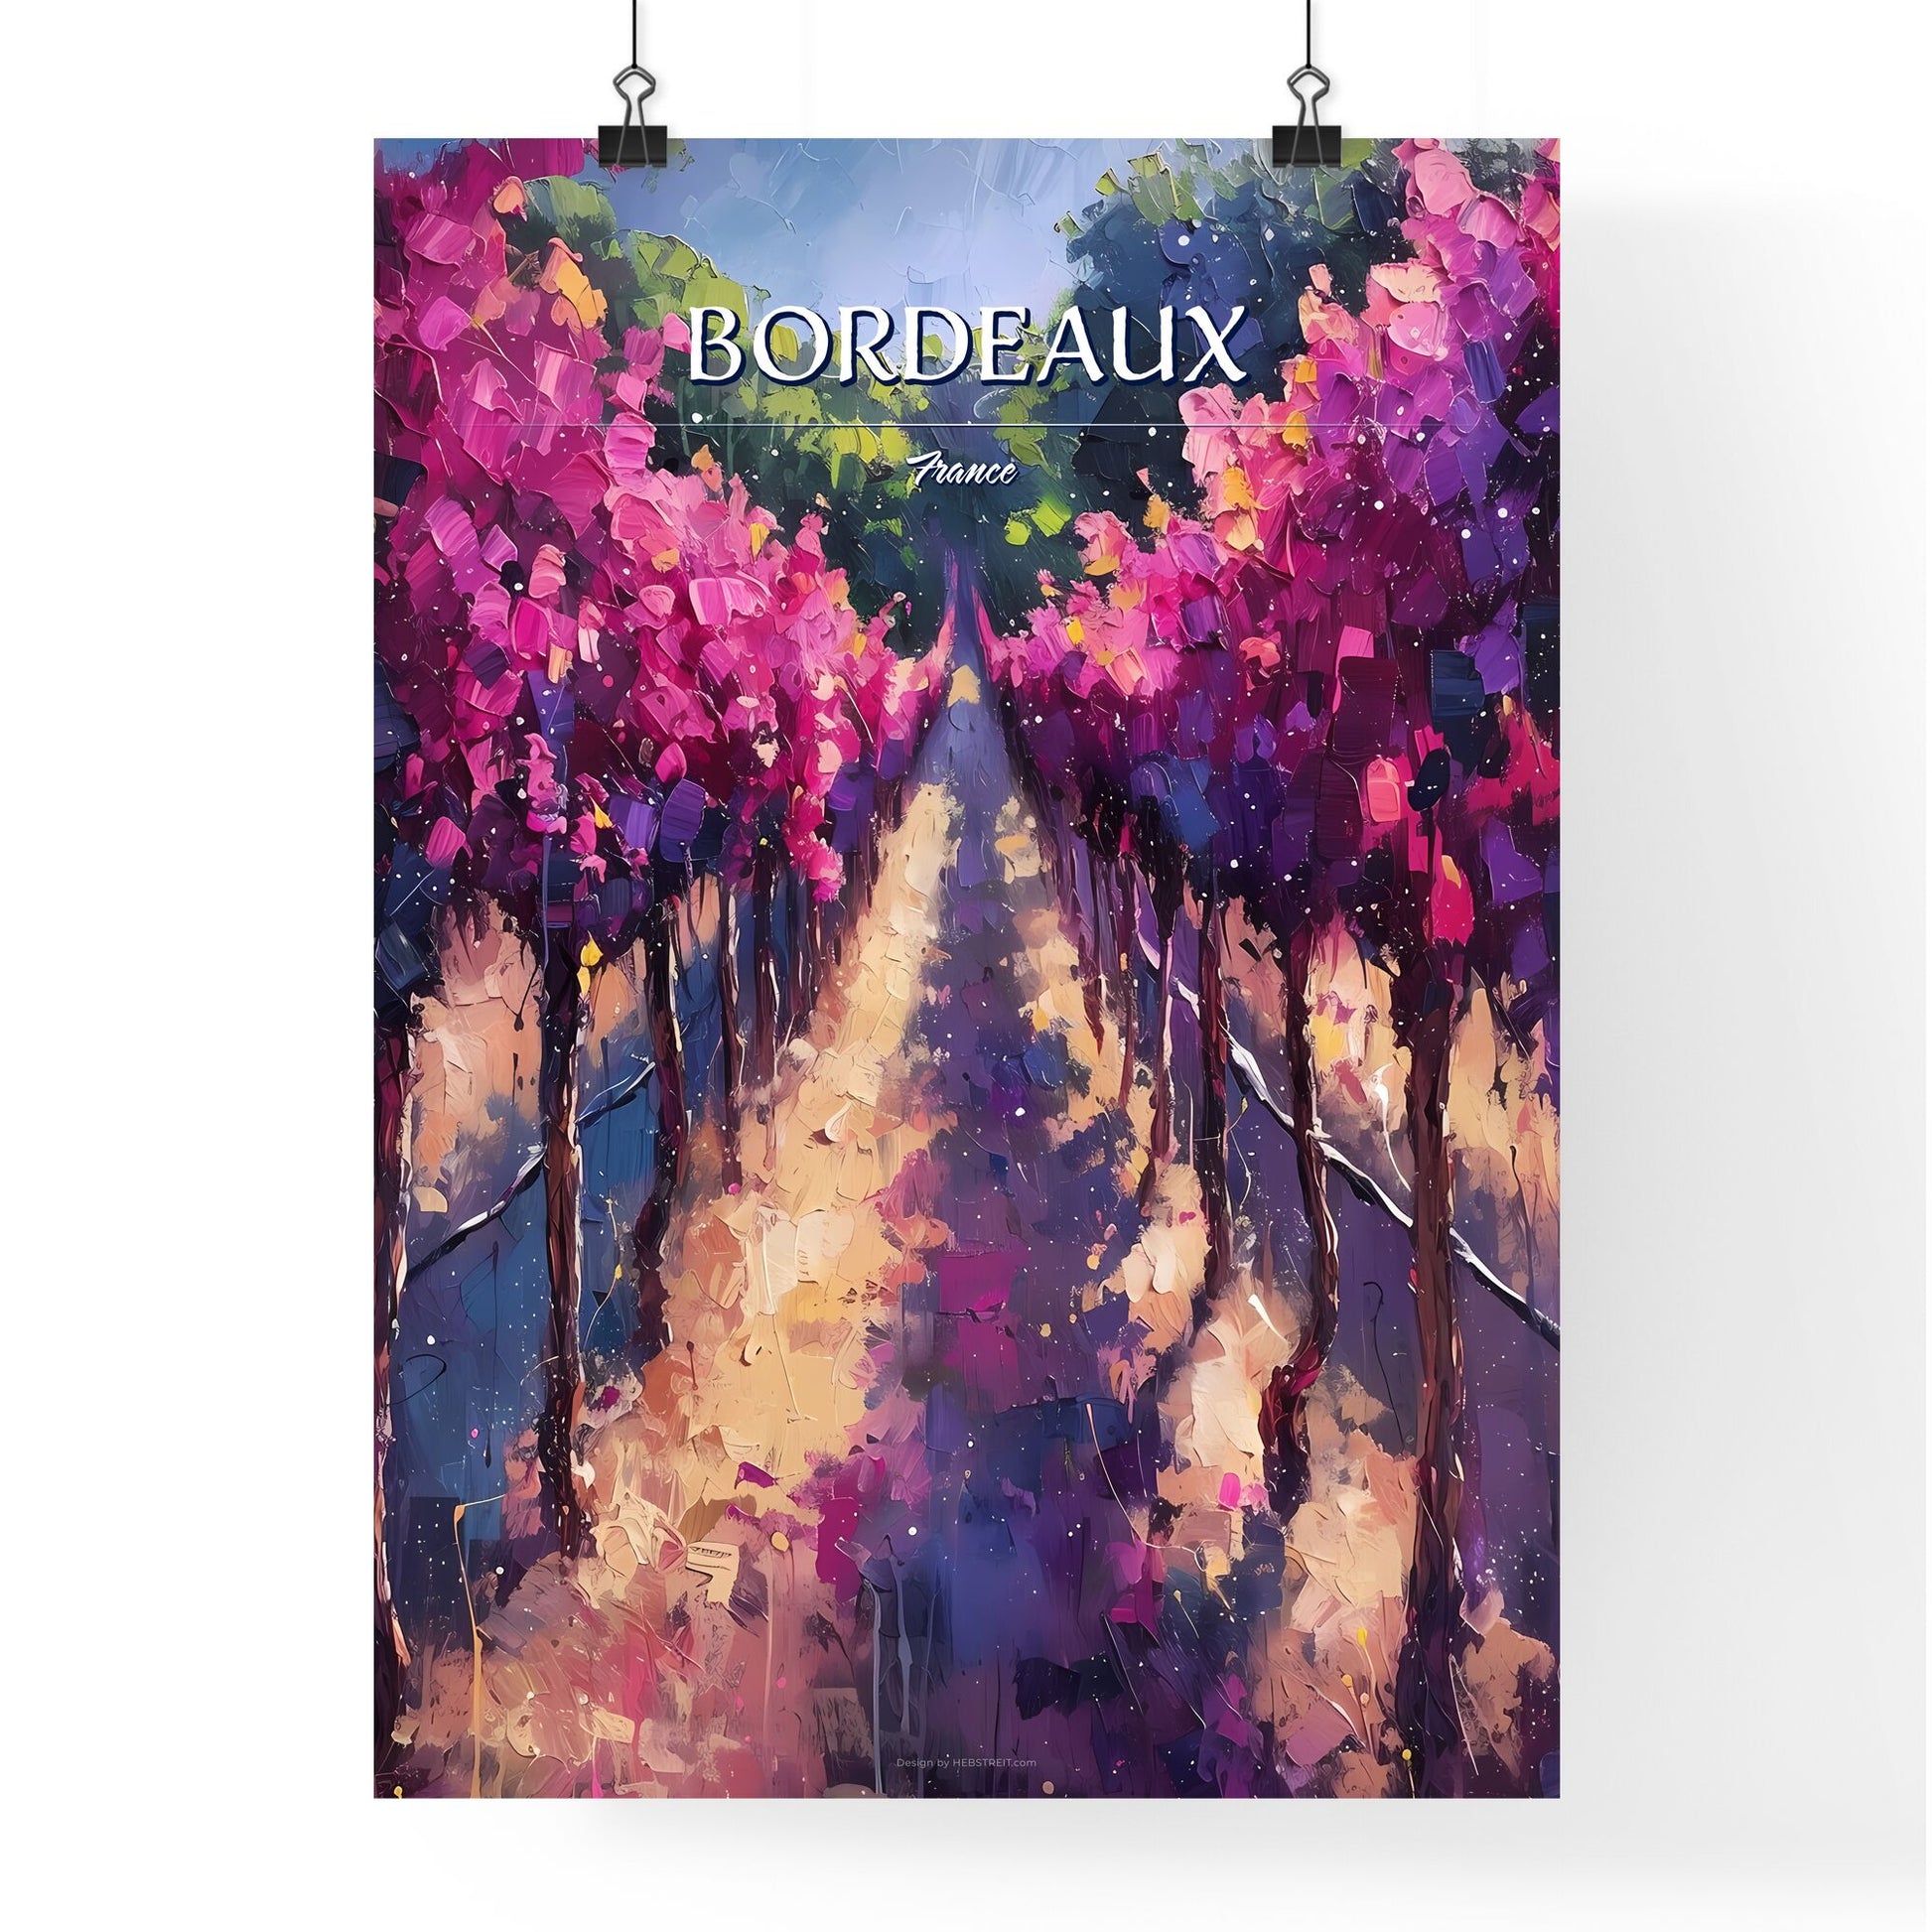 Bordeaux, France - Art print of a painting of a row of trees Default Title